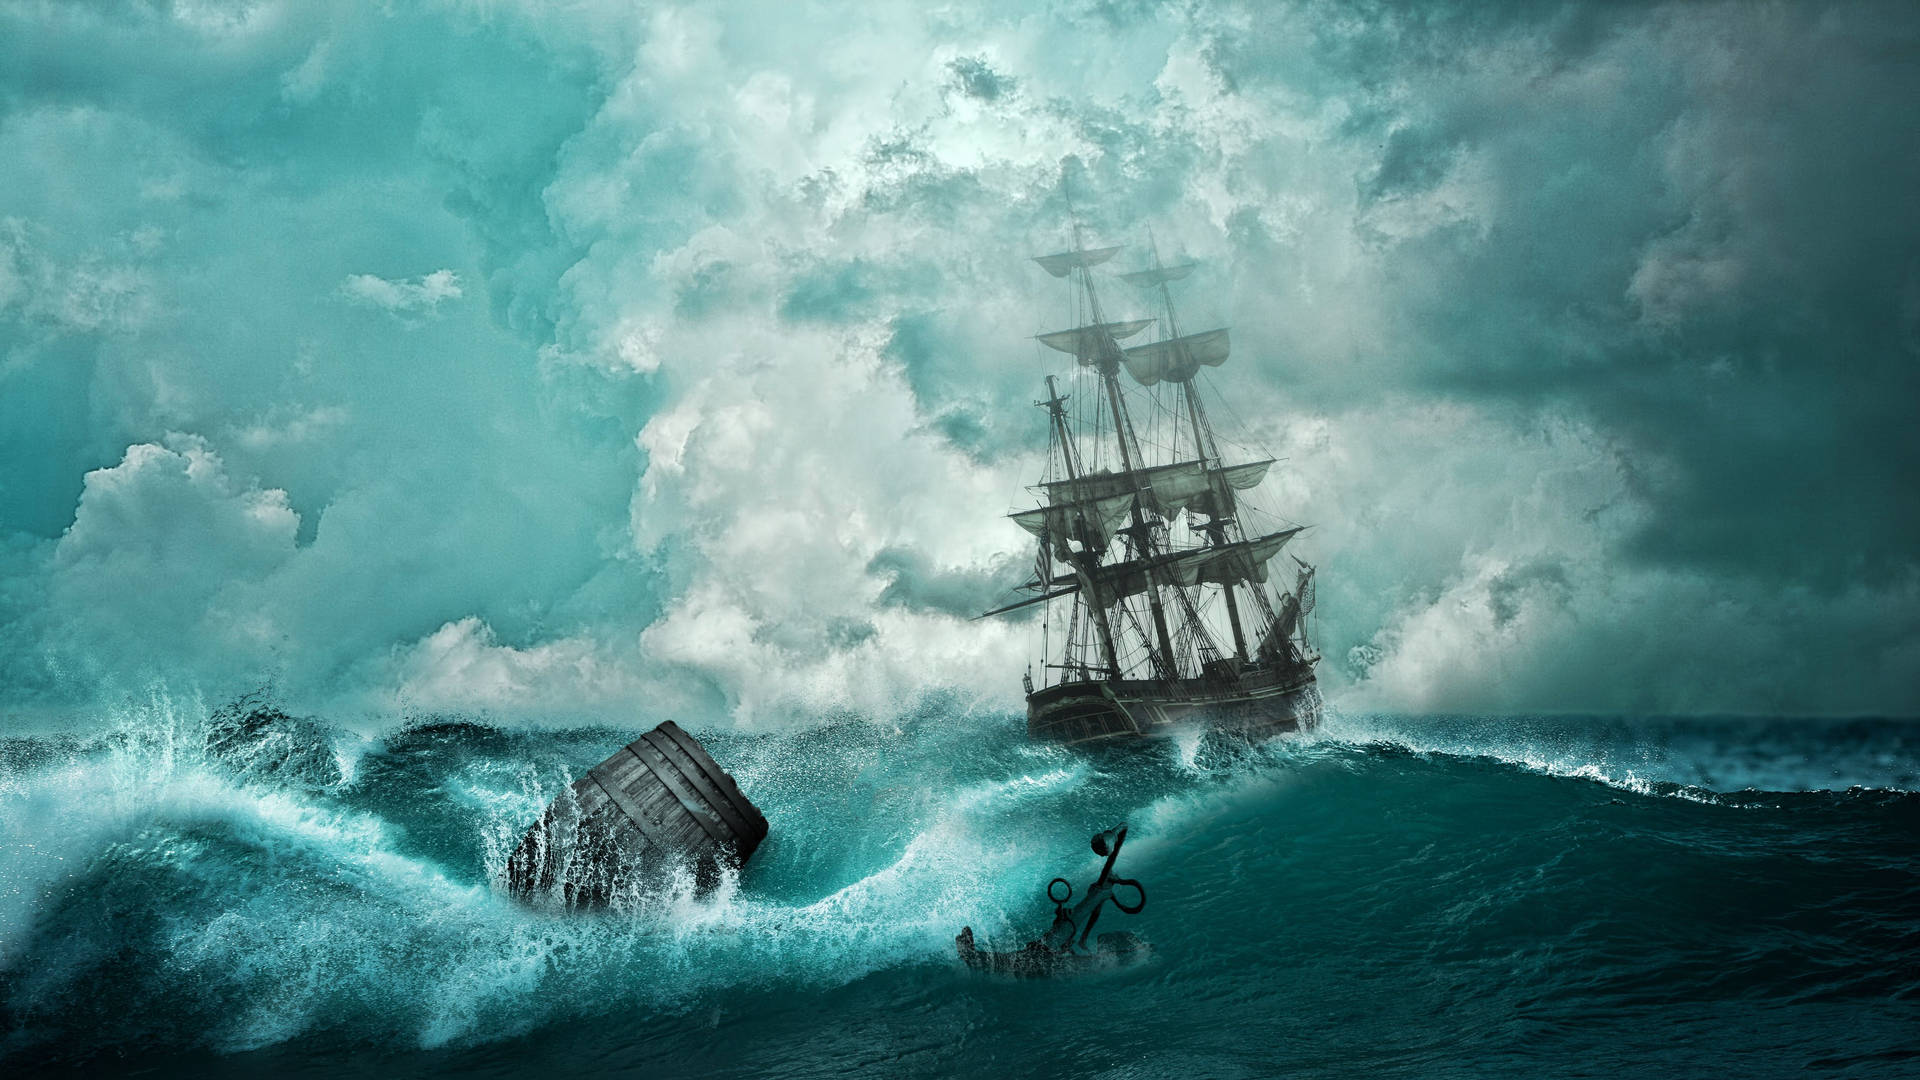 4K Pirate Ship Caught In Strong Waves Wallpaper